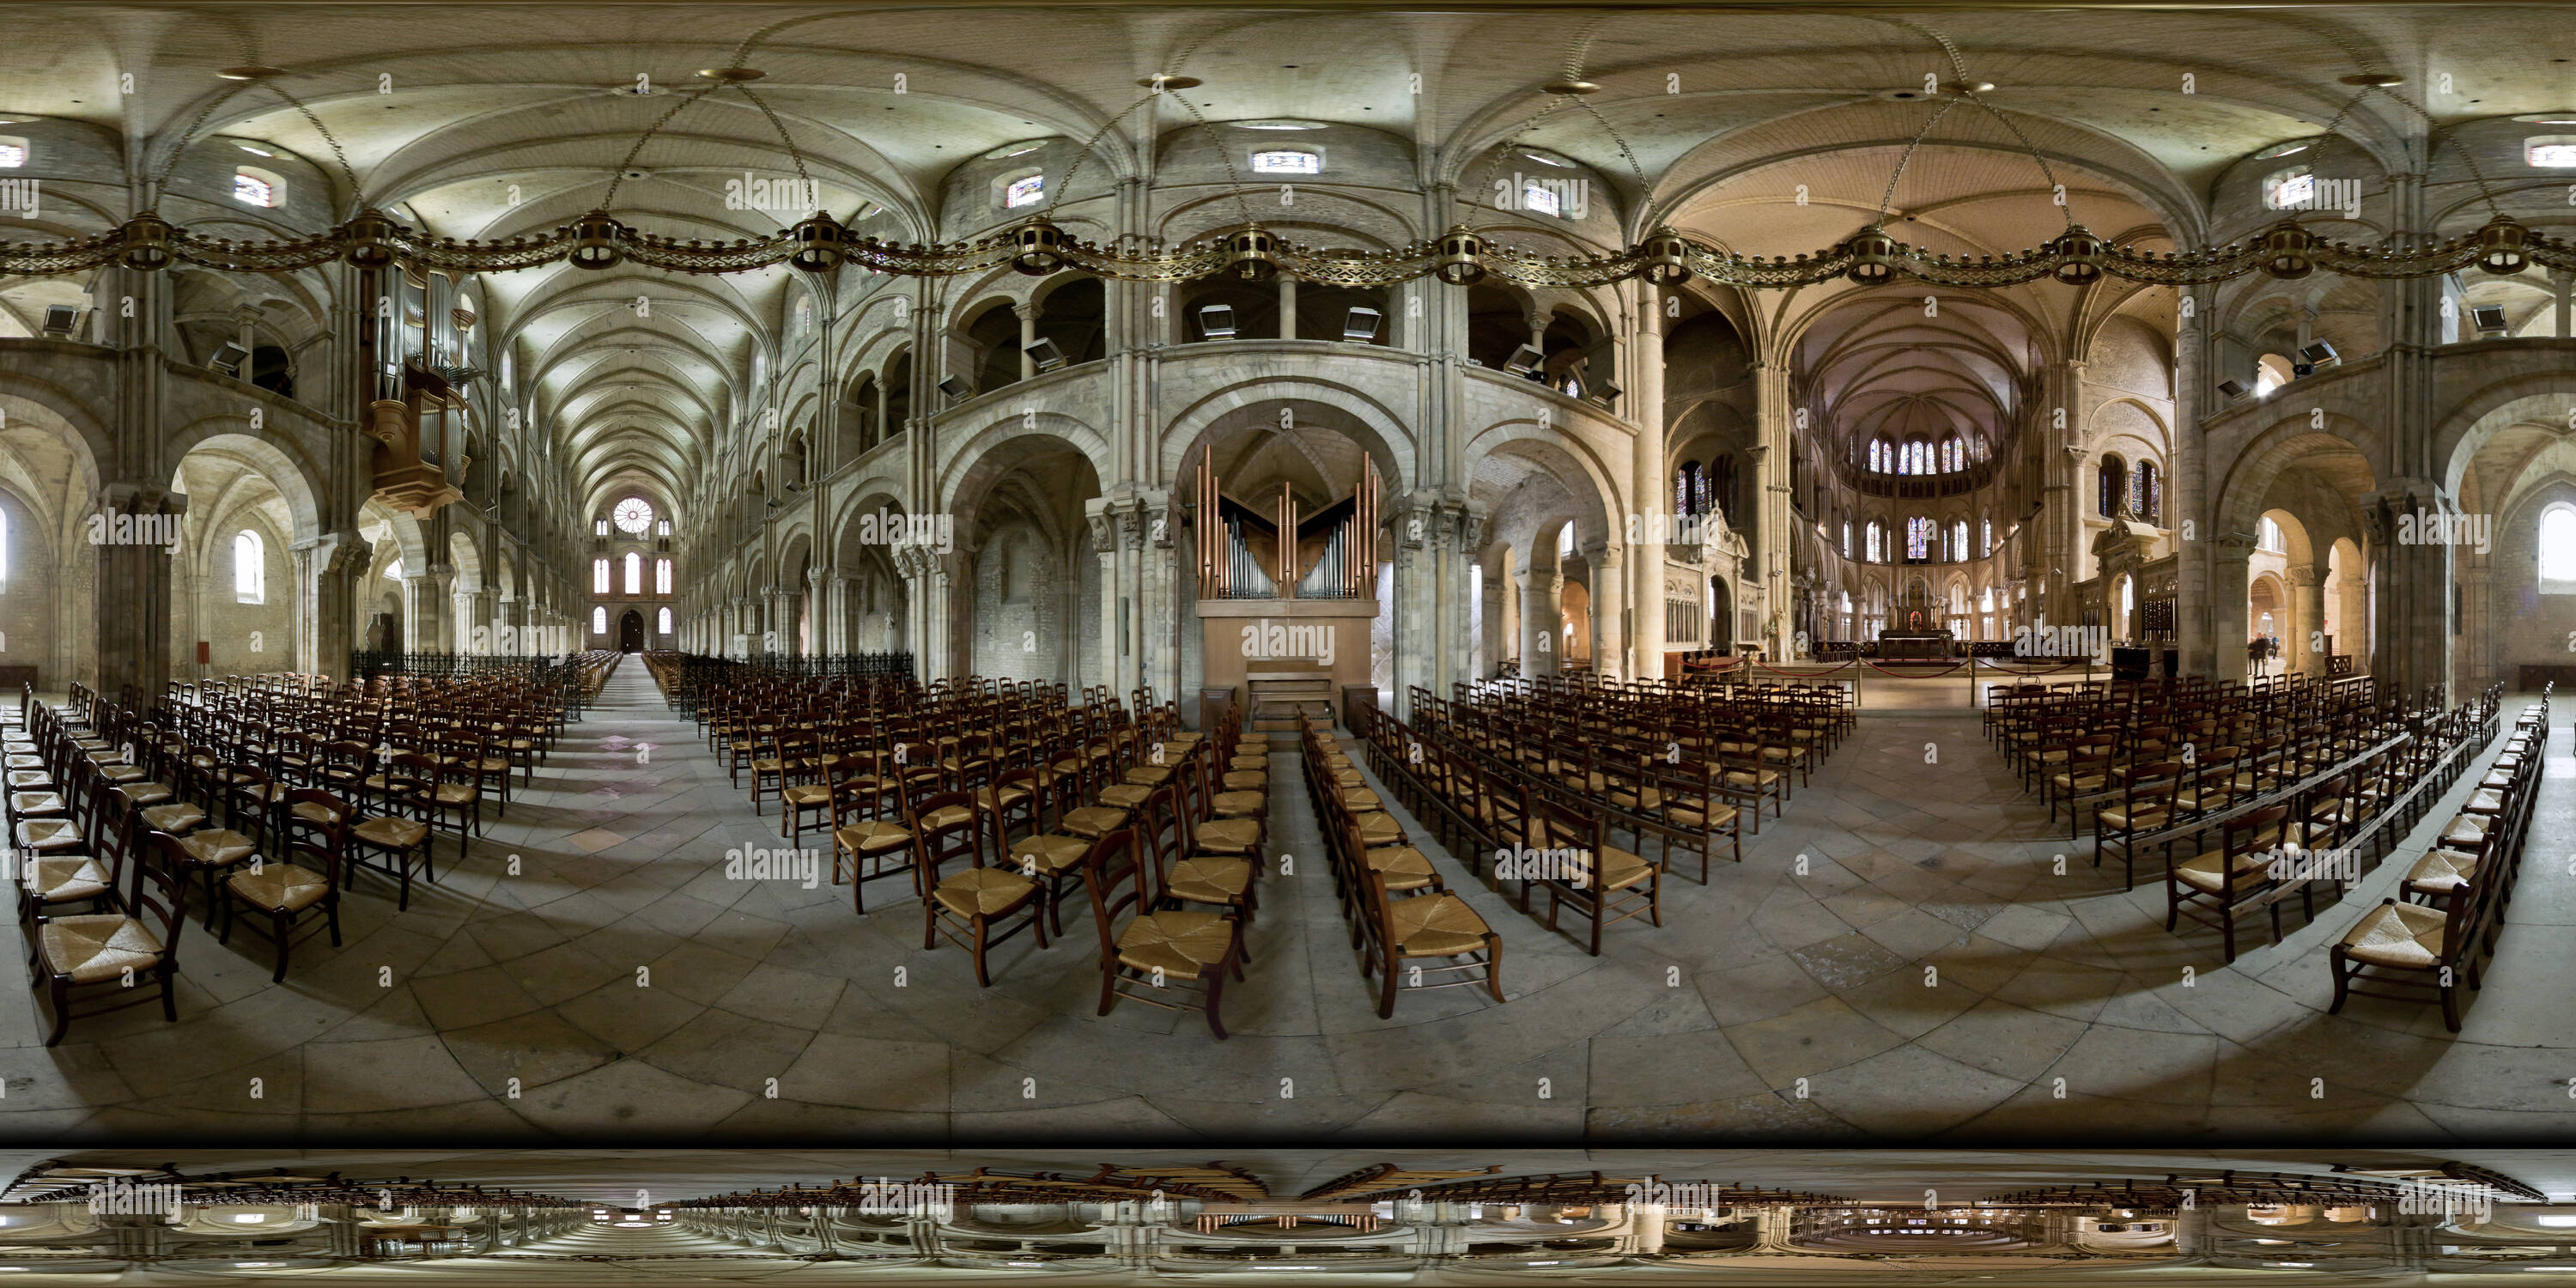 360 degree panoramic view of Abbey of Saint Remi (Main Aisle), Reims, 2016-10, freehand